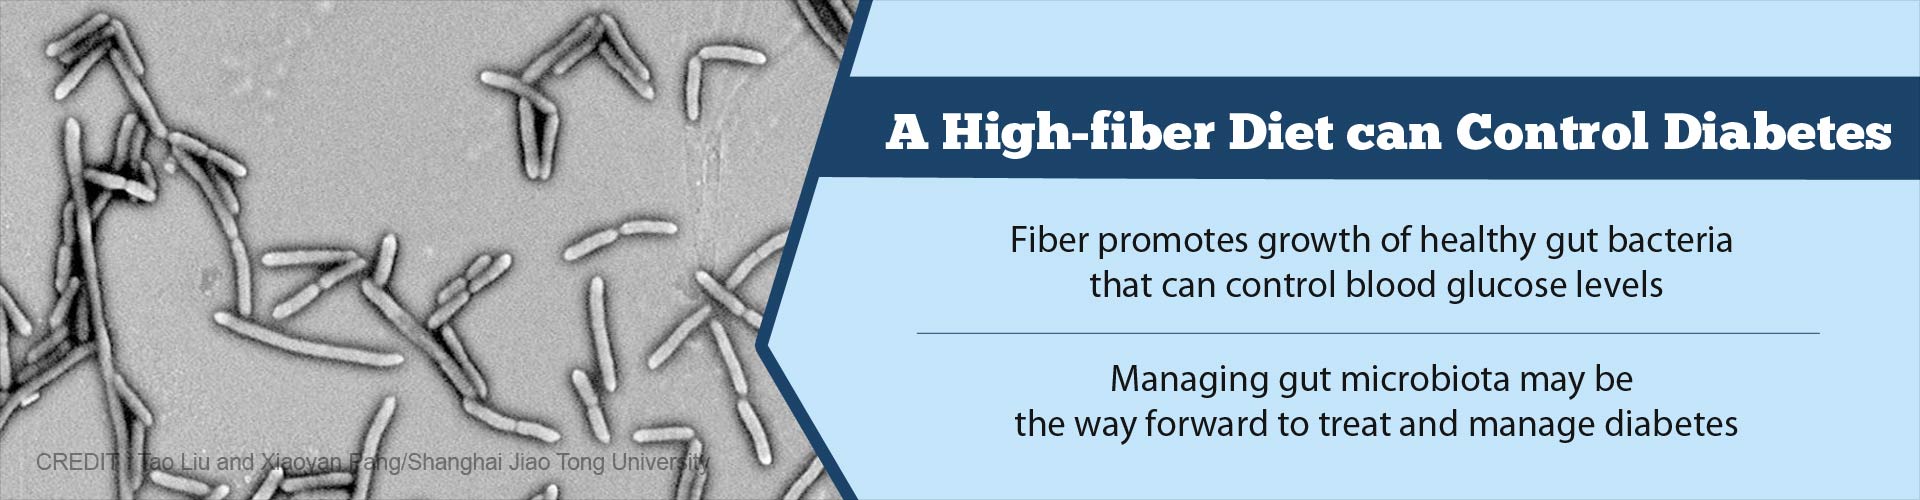 a high-fiber diet can control diabetes
- fiber promotes growth of healthy gut bacteria that can control blood glucose levels
- managing gut microbiota maybe the way forward to treat and manage diabetes